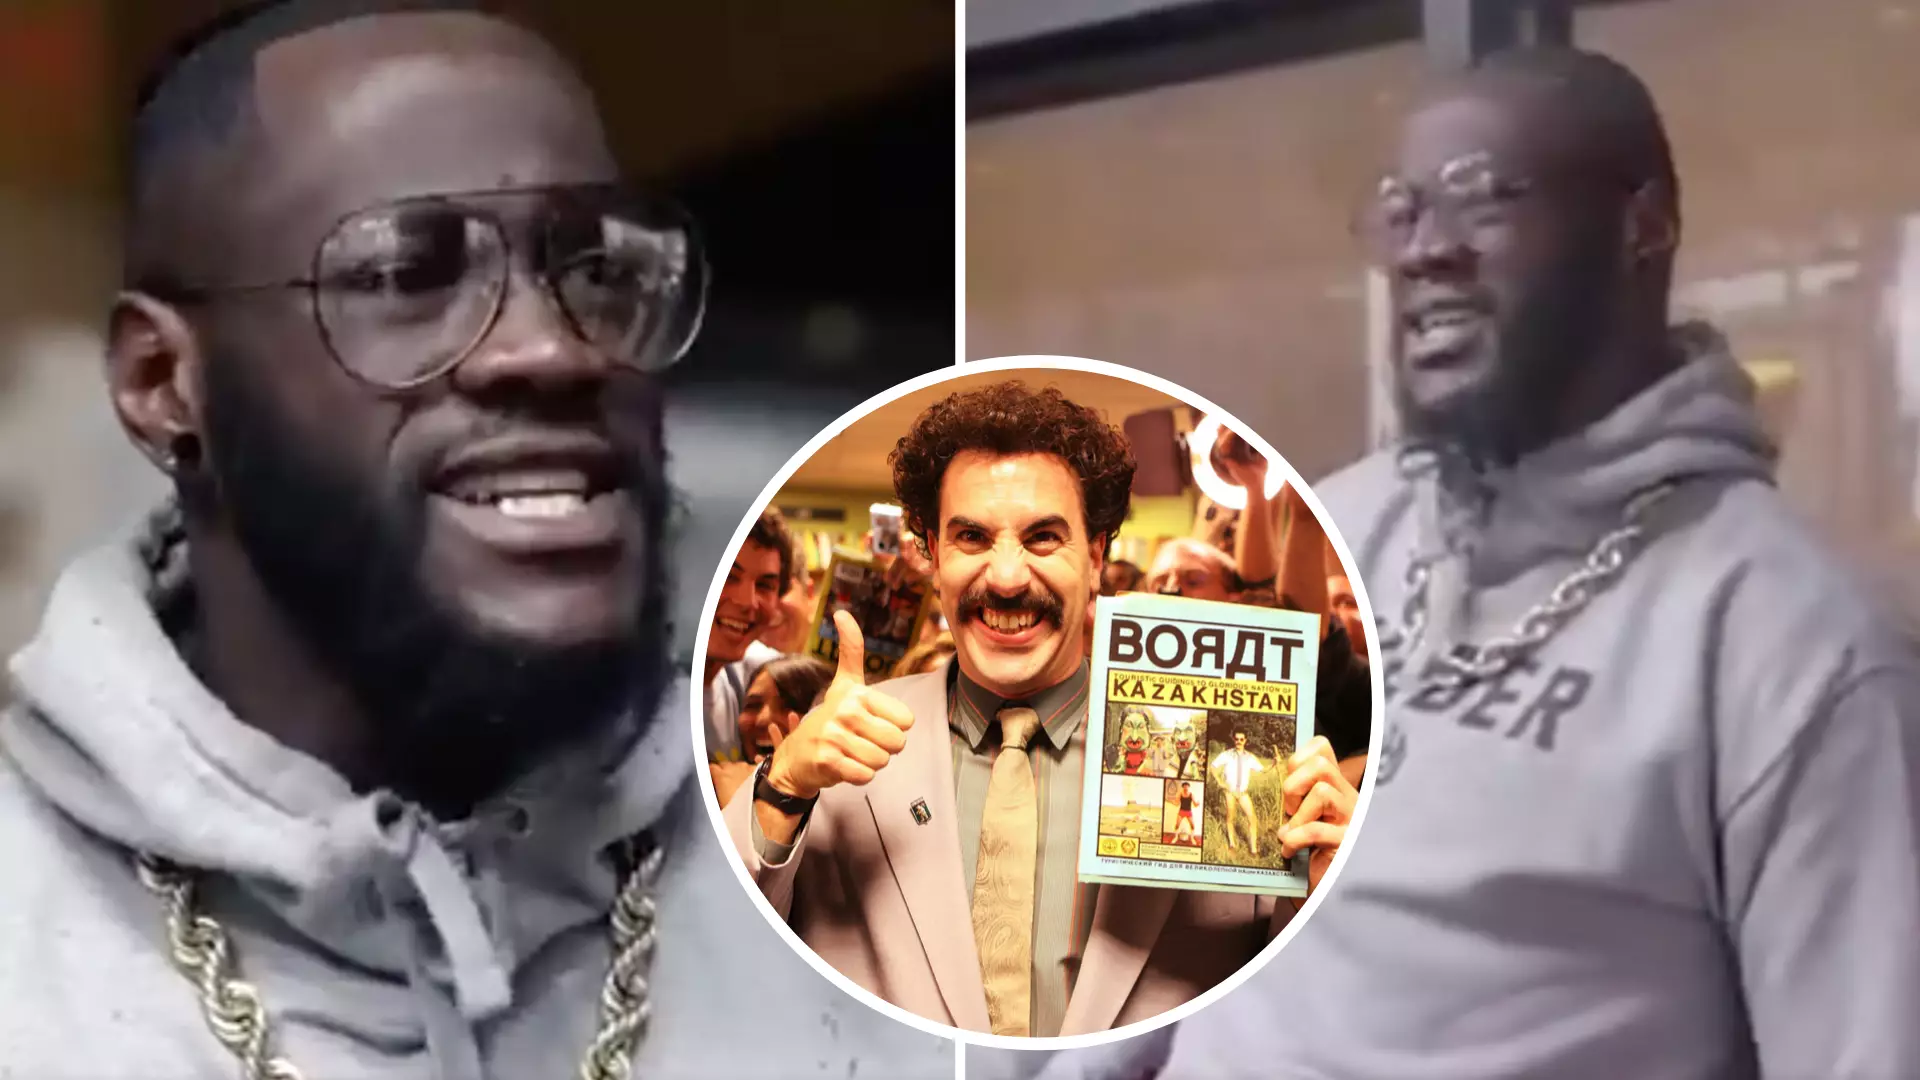 Remembering When Deontay Wilder’s Shocking Attempt At An English Accent Made Him Sound Like Borat